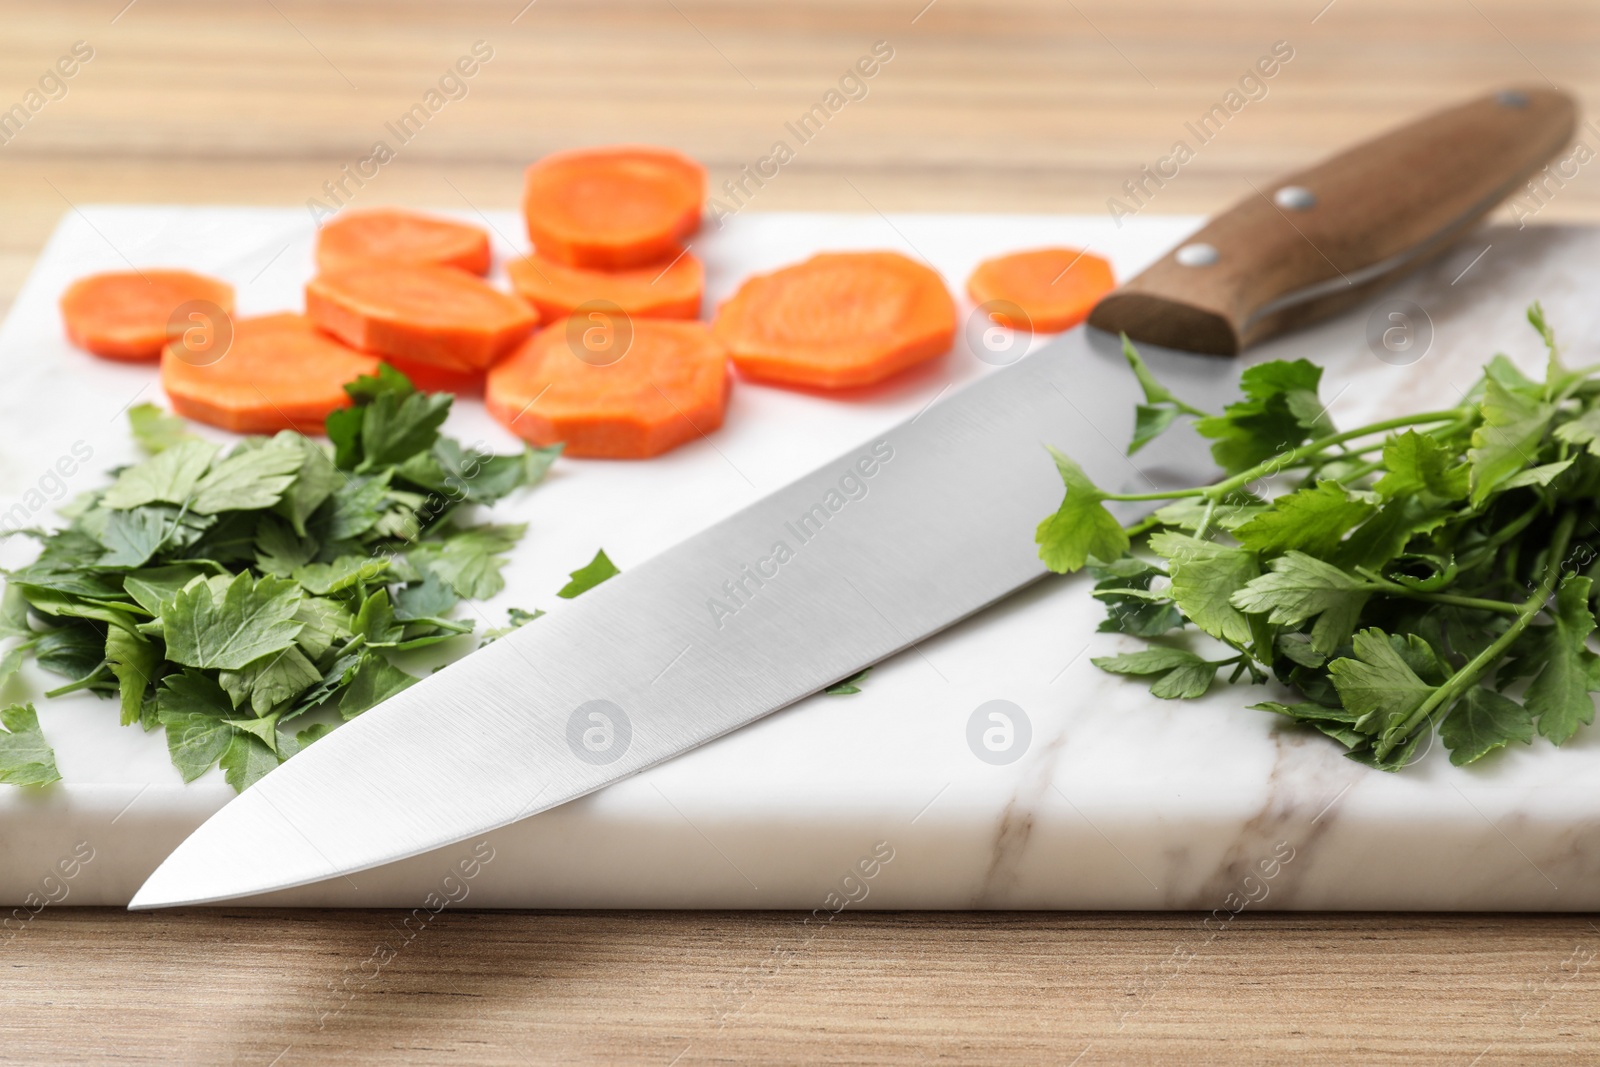 Photo of Board with sharp knife and cut products on table, closeup